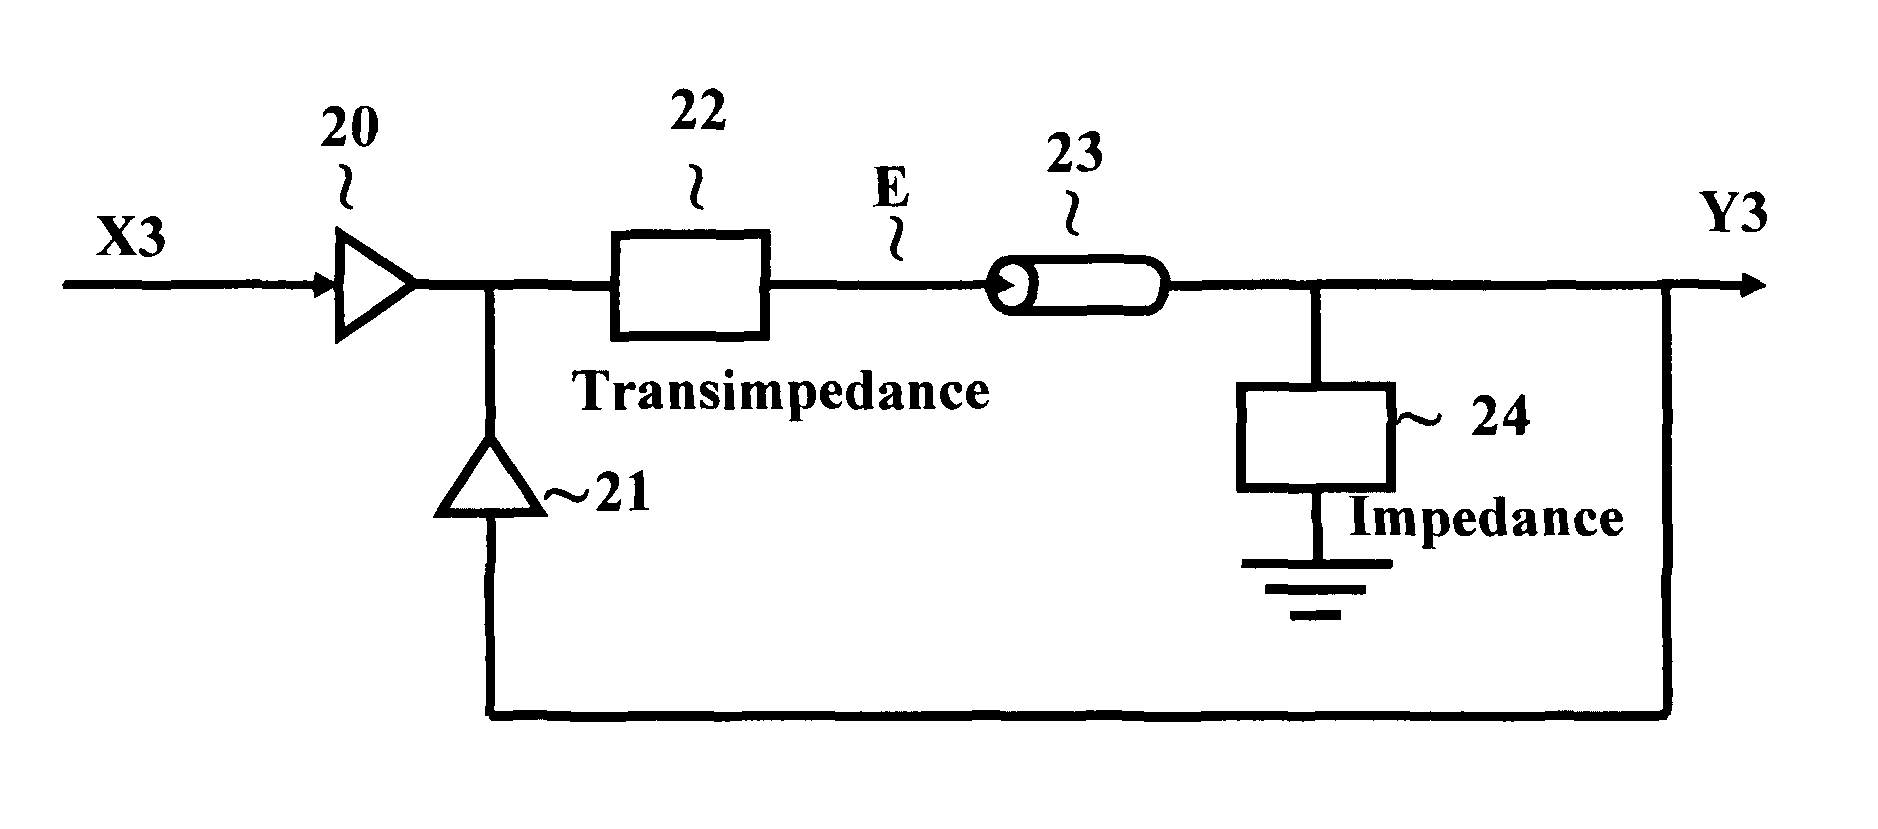 Continuous-time multi-gigahertz filter using transmission line delay elements